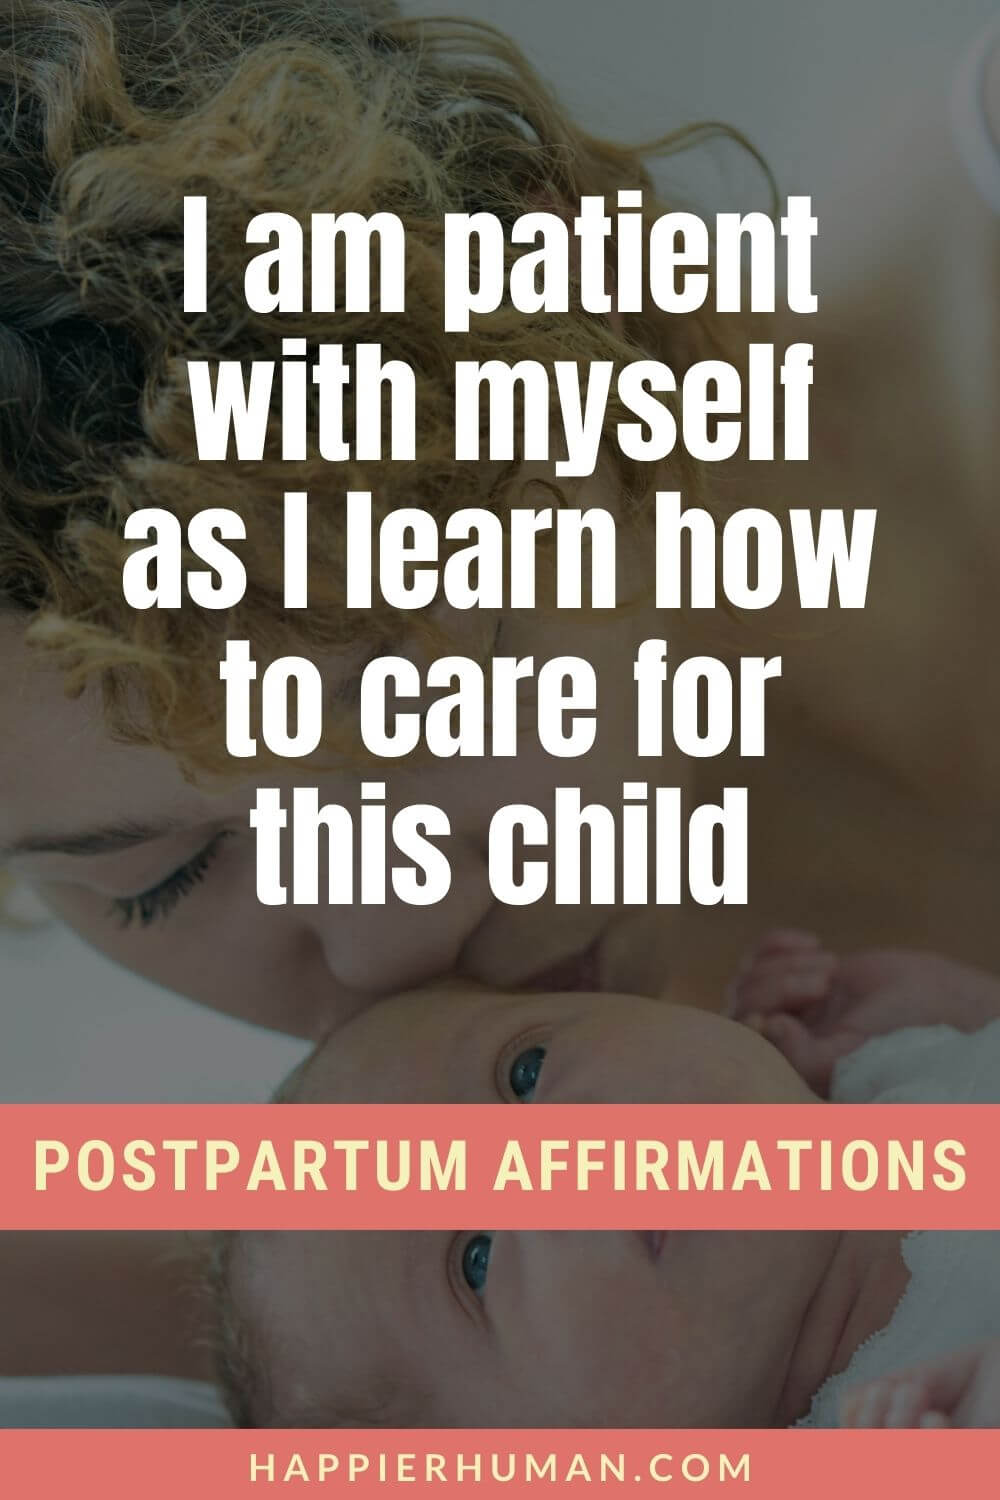 Postpartum Affirmations - I am patient with myself as I learn how to care for this child | postpartum affirmation cards | affirmations for breastfeeding | affirmations for newborn baby